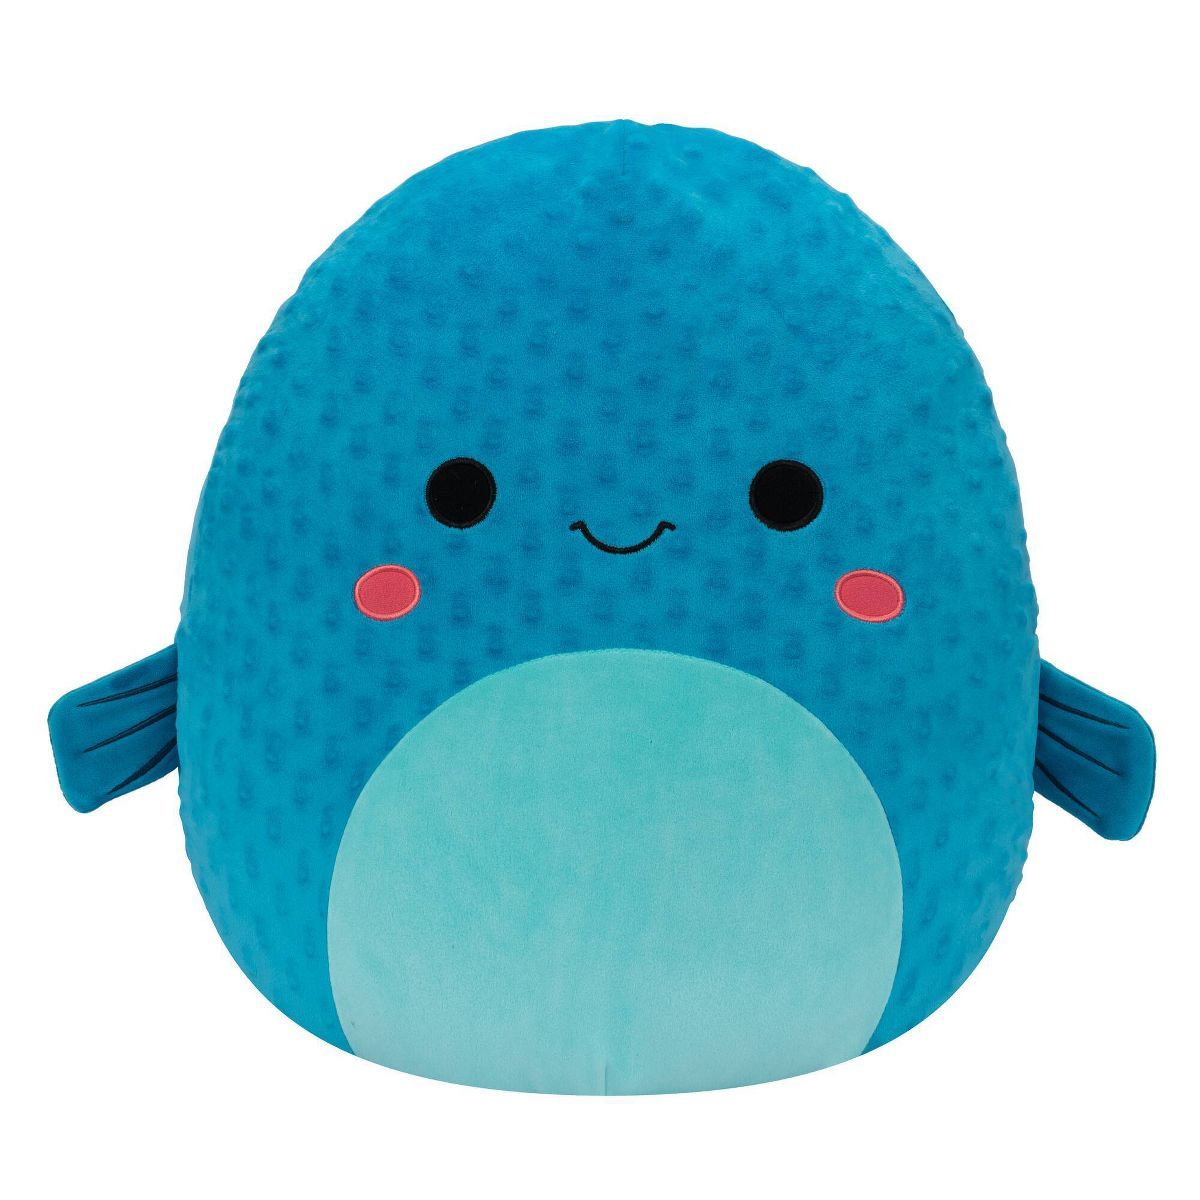 Squishmallows 16" Refalo the Blue Pufferfish Plush Toy | Target